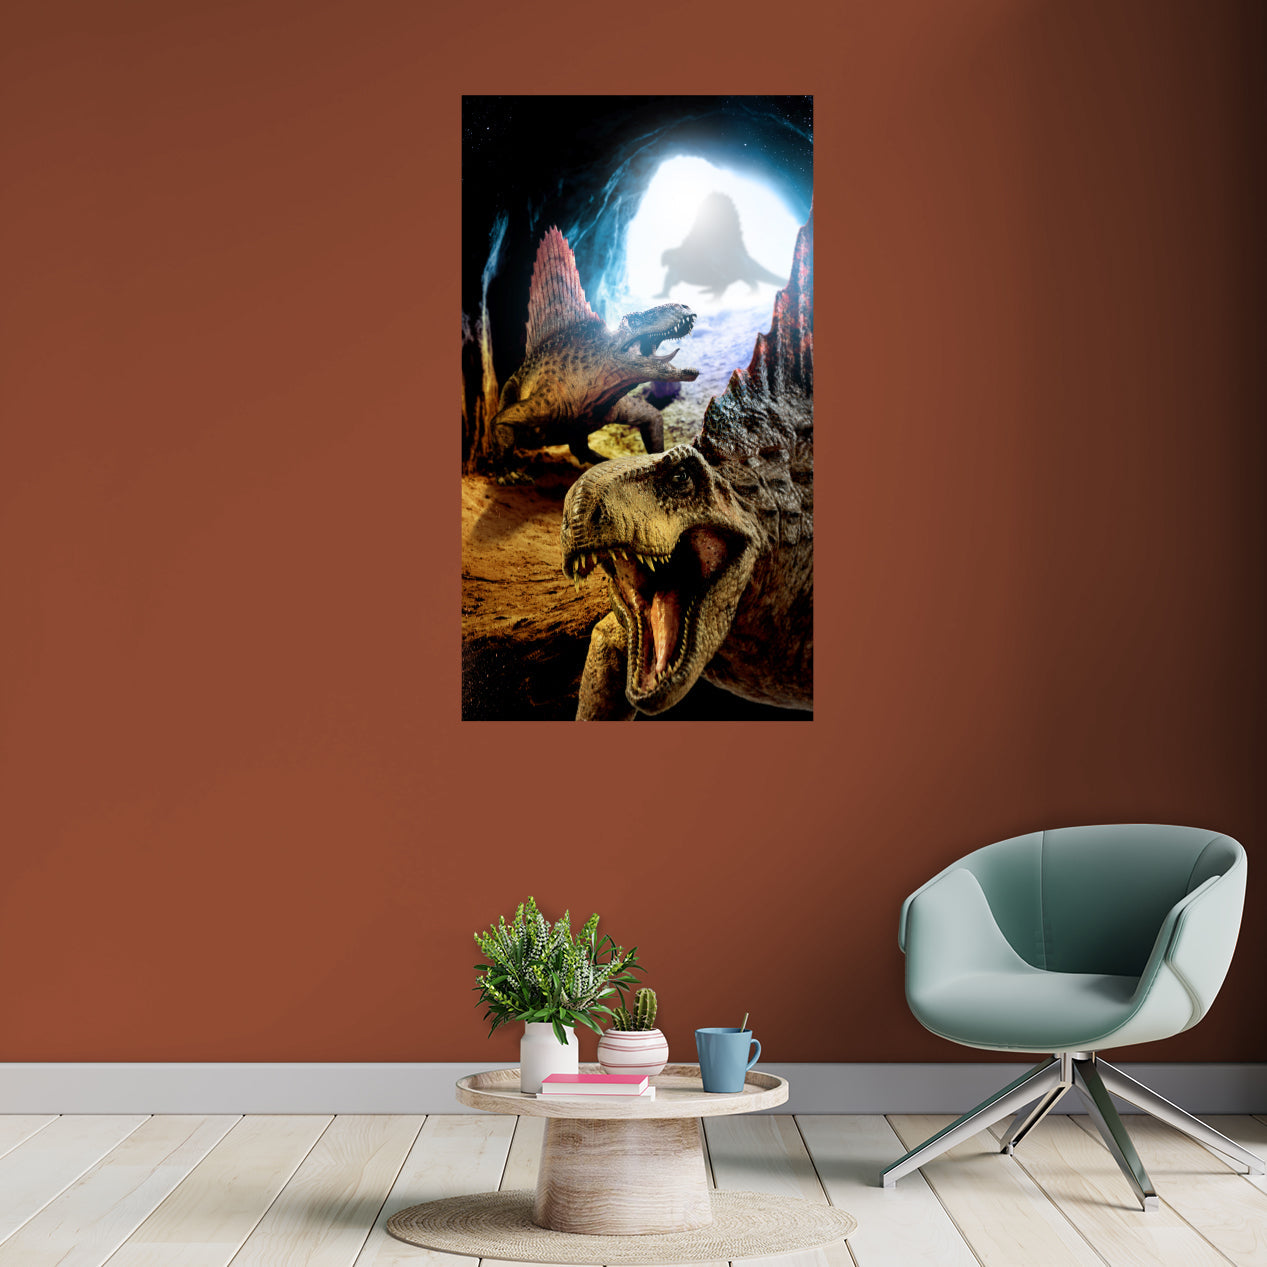 Jurassic World Dominion: Dimetrodon Amber Mine Two Poster - Officially Licensed NBC Universal Removable Adhesive Decal